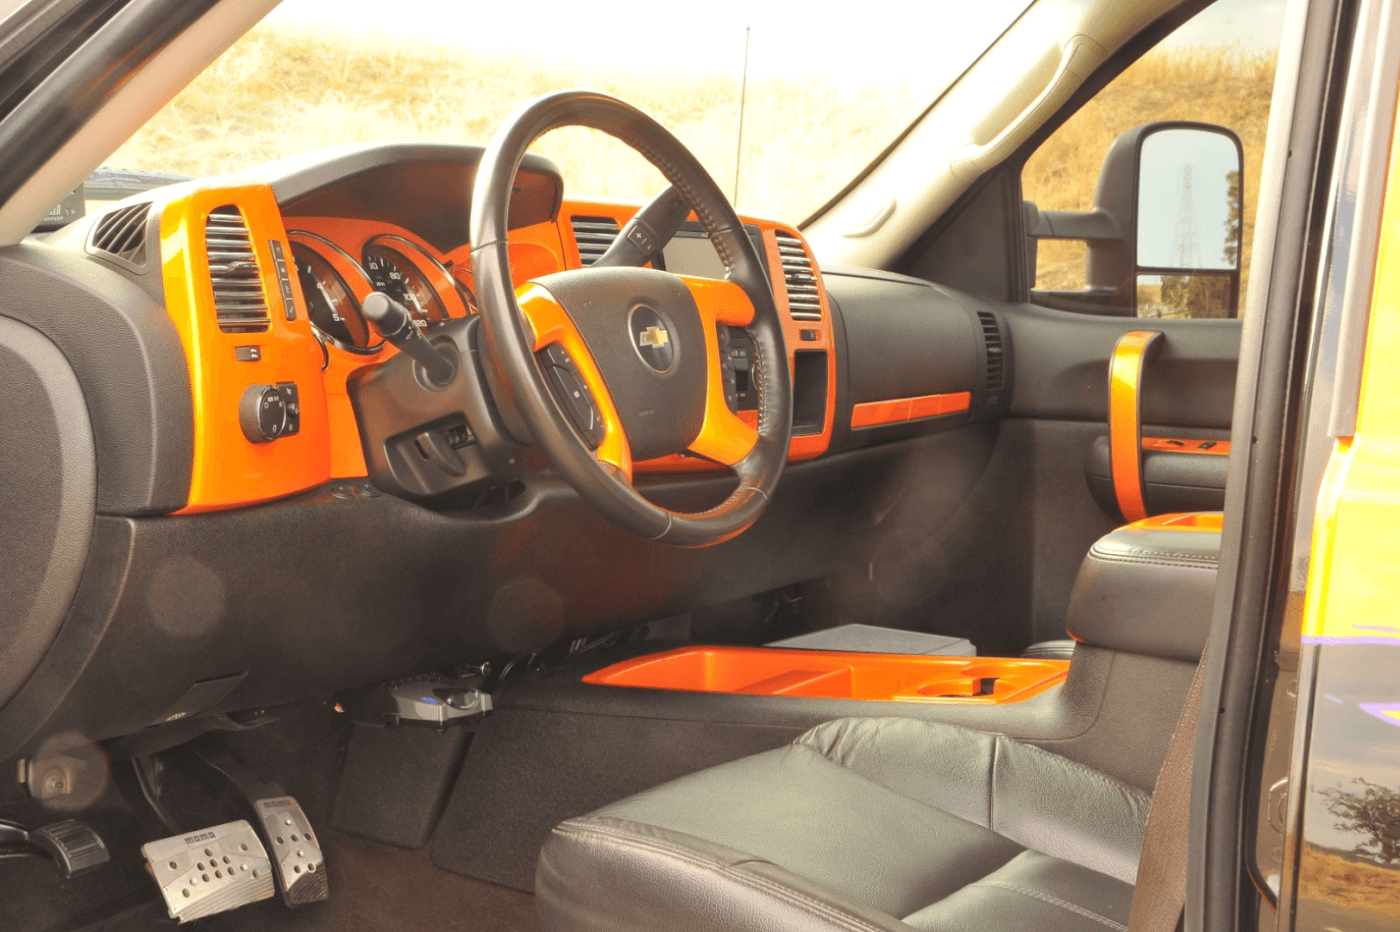 West painted the interior trim to give the Chevy a unique look.